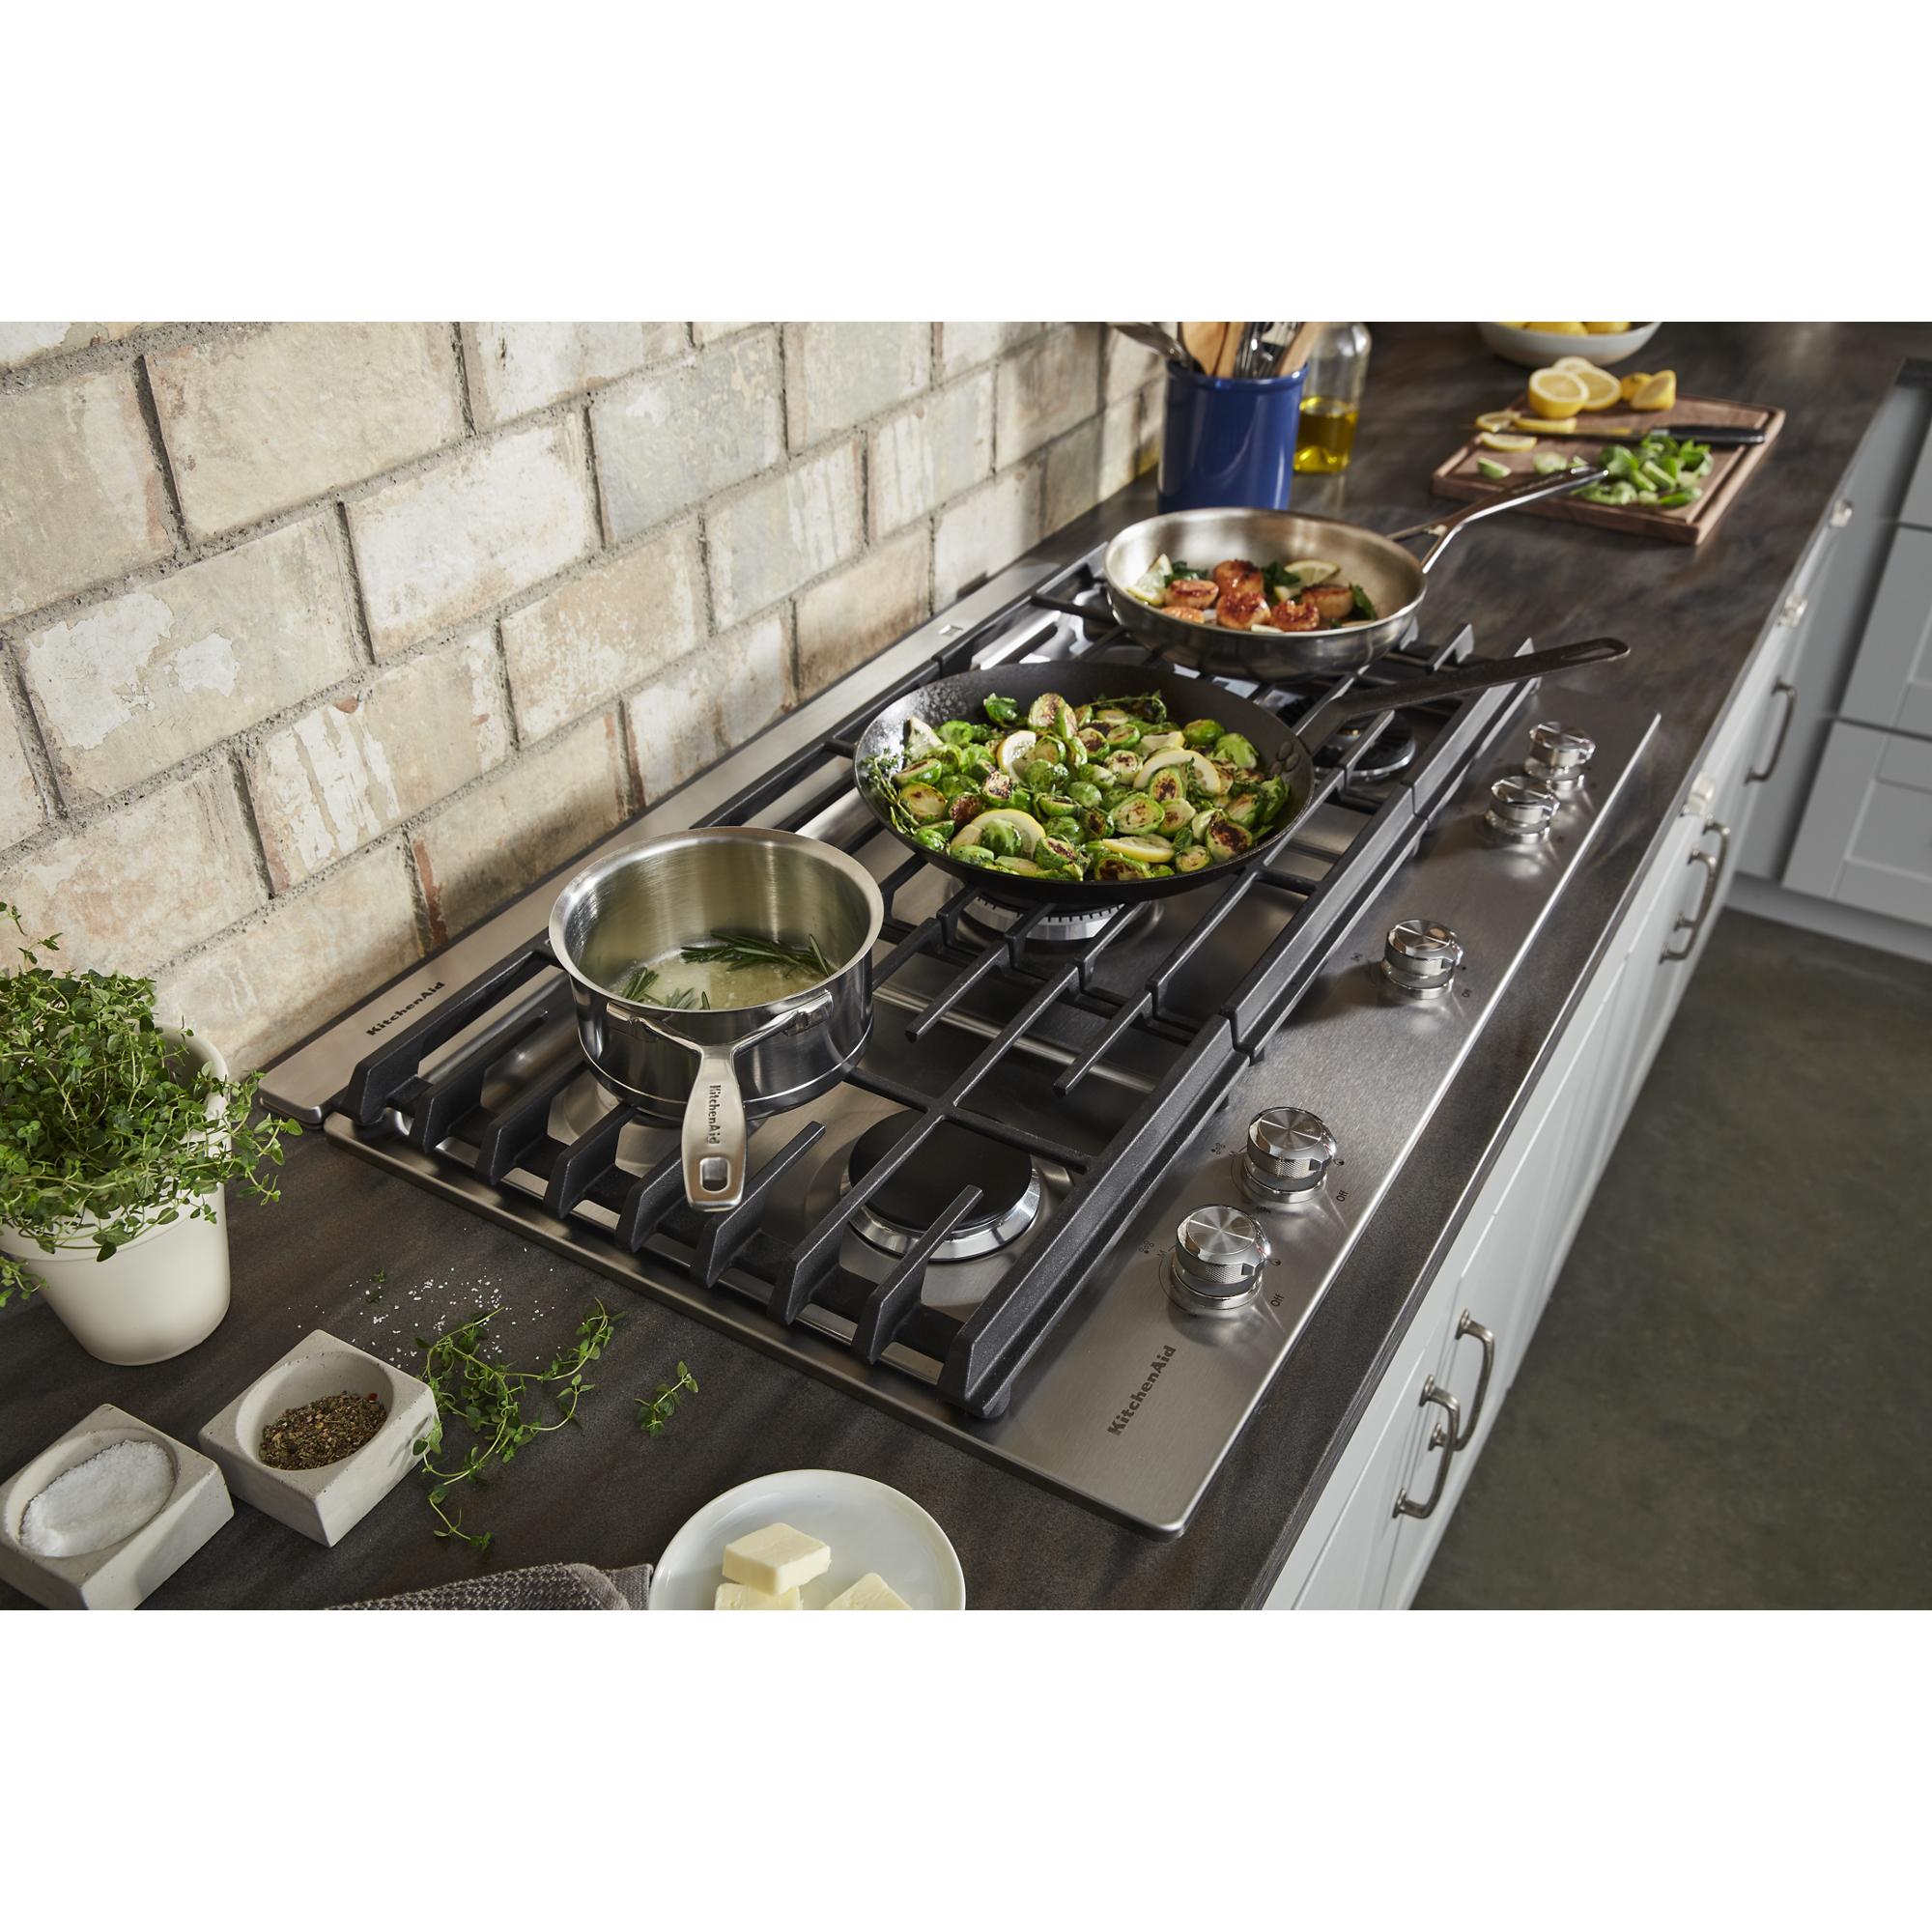 5 Burner Gas Cooktop With Griddle, Countertop Gas Stove With Griddle